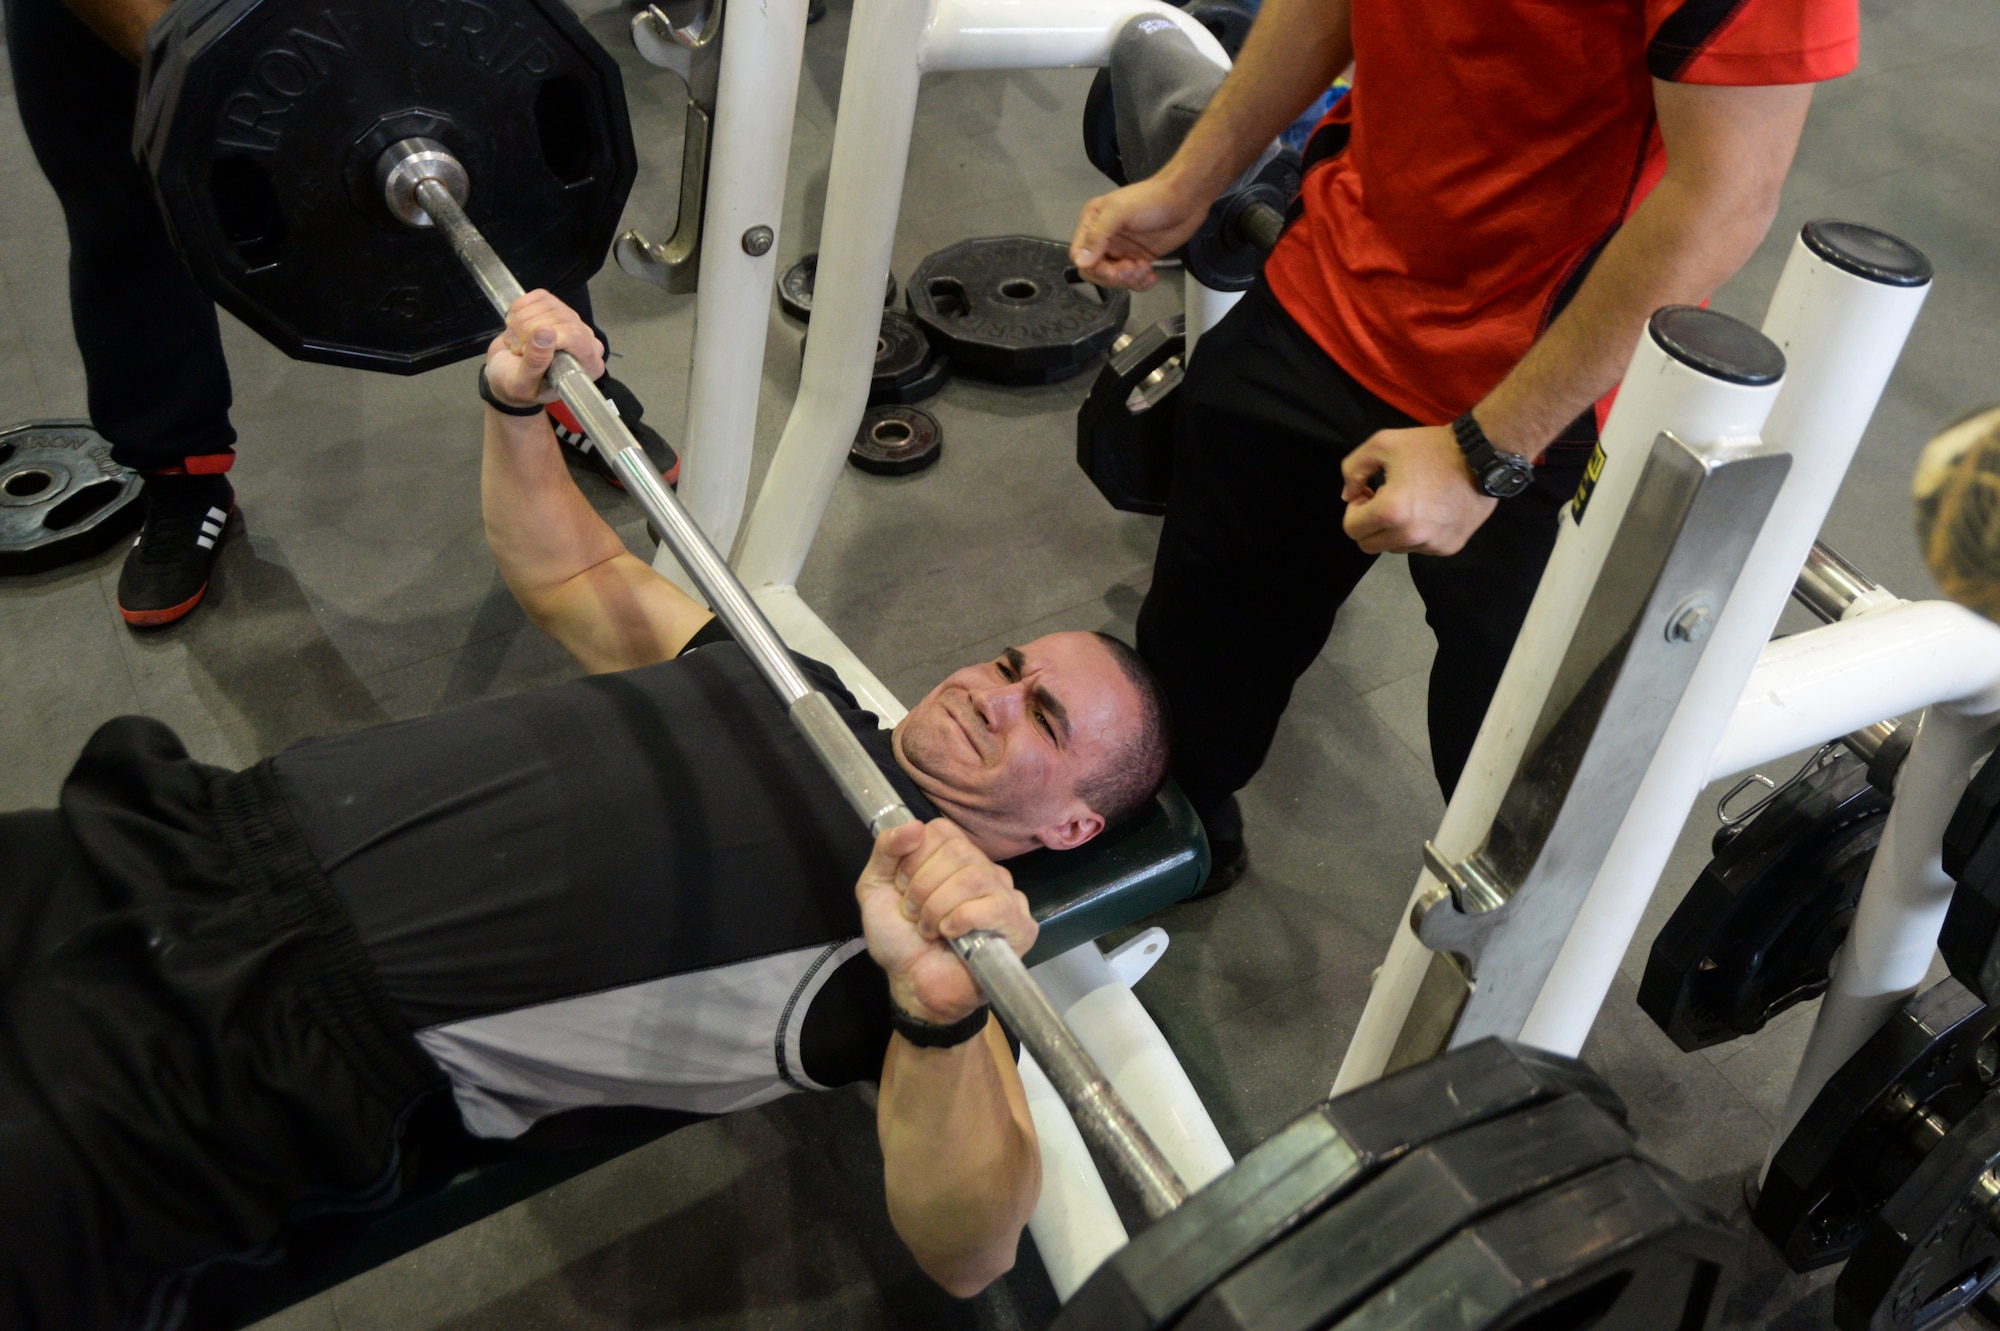 U.S. Air Force Senior Airman Bryan Hernandez, 88th Security Forces Squadron patrolman, participates in the bench press event as part of the Powerlifting Competition held at Wright Field Fitness Center, Wright-Patterson Air Force Base, Ohio, November 15, 2014. Eight power lifters competed in the competition. (U.S. Air Force photo by Wesley Farnsworth / Released)